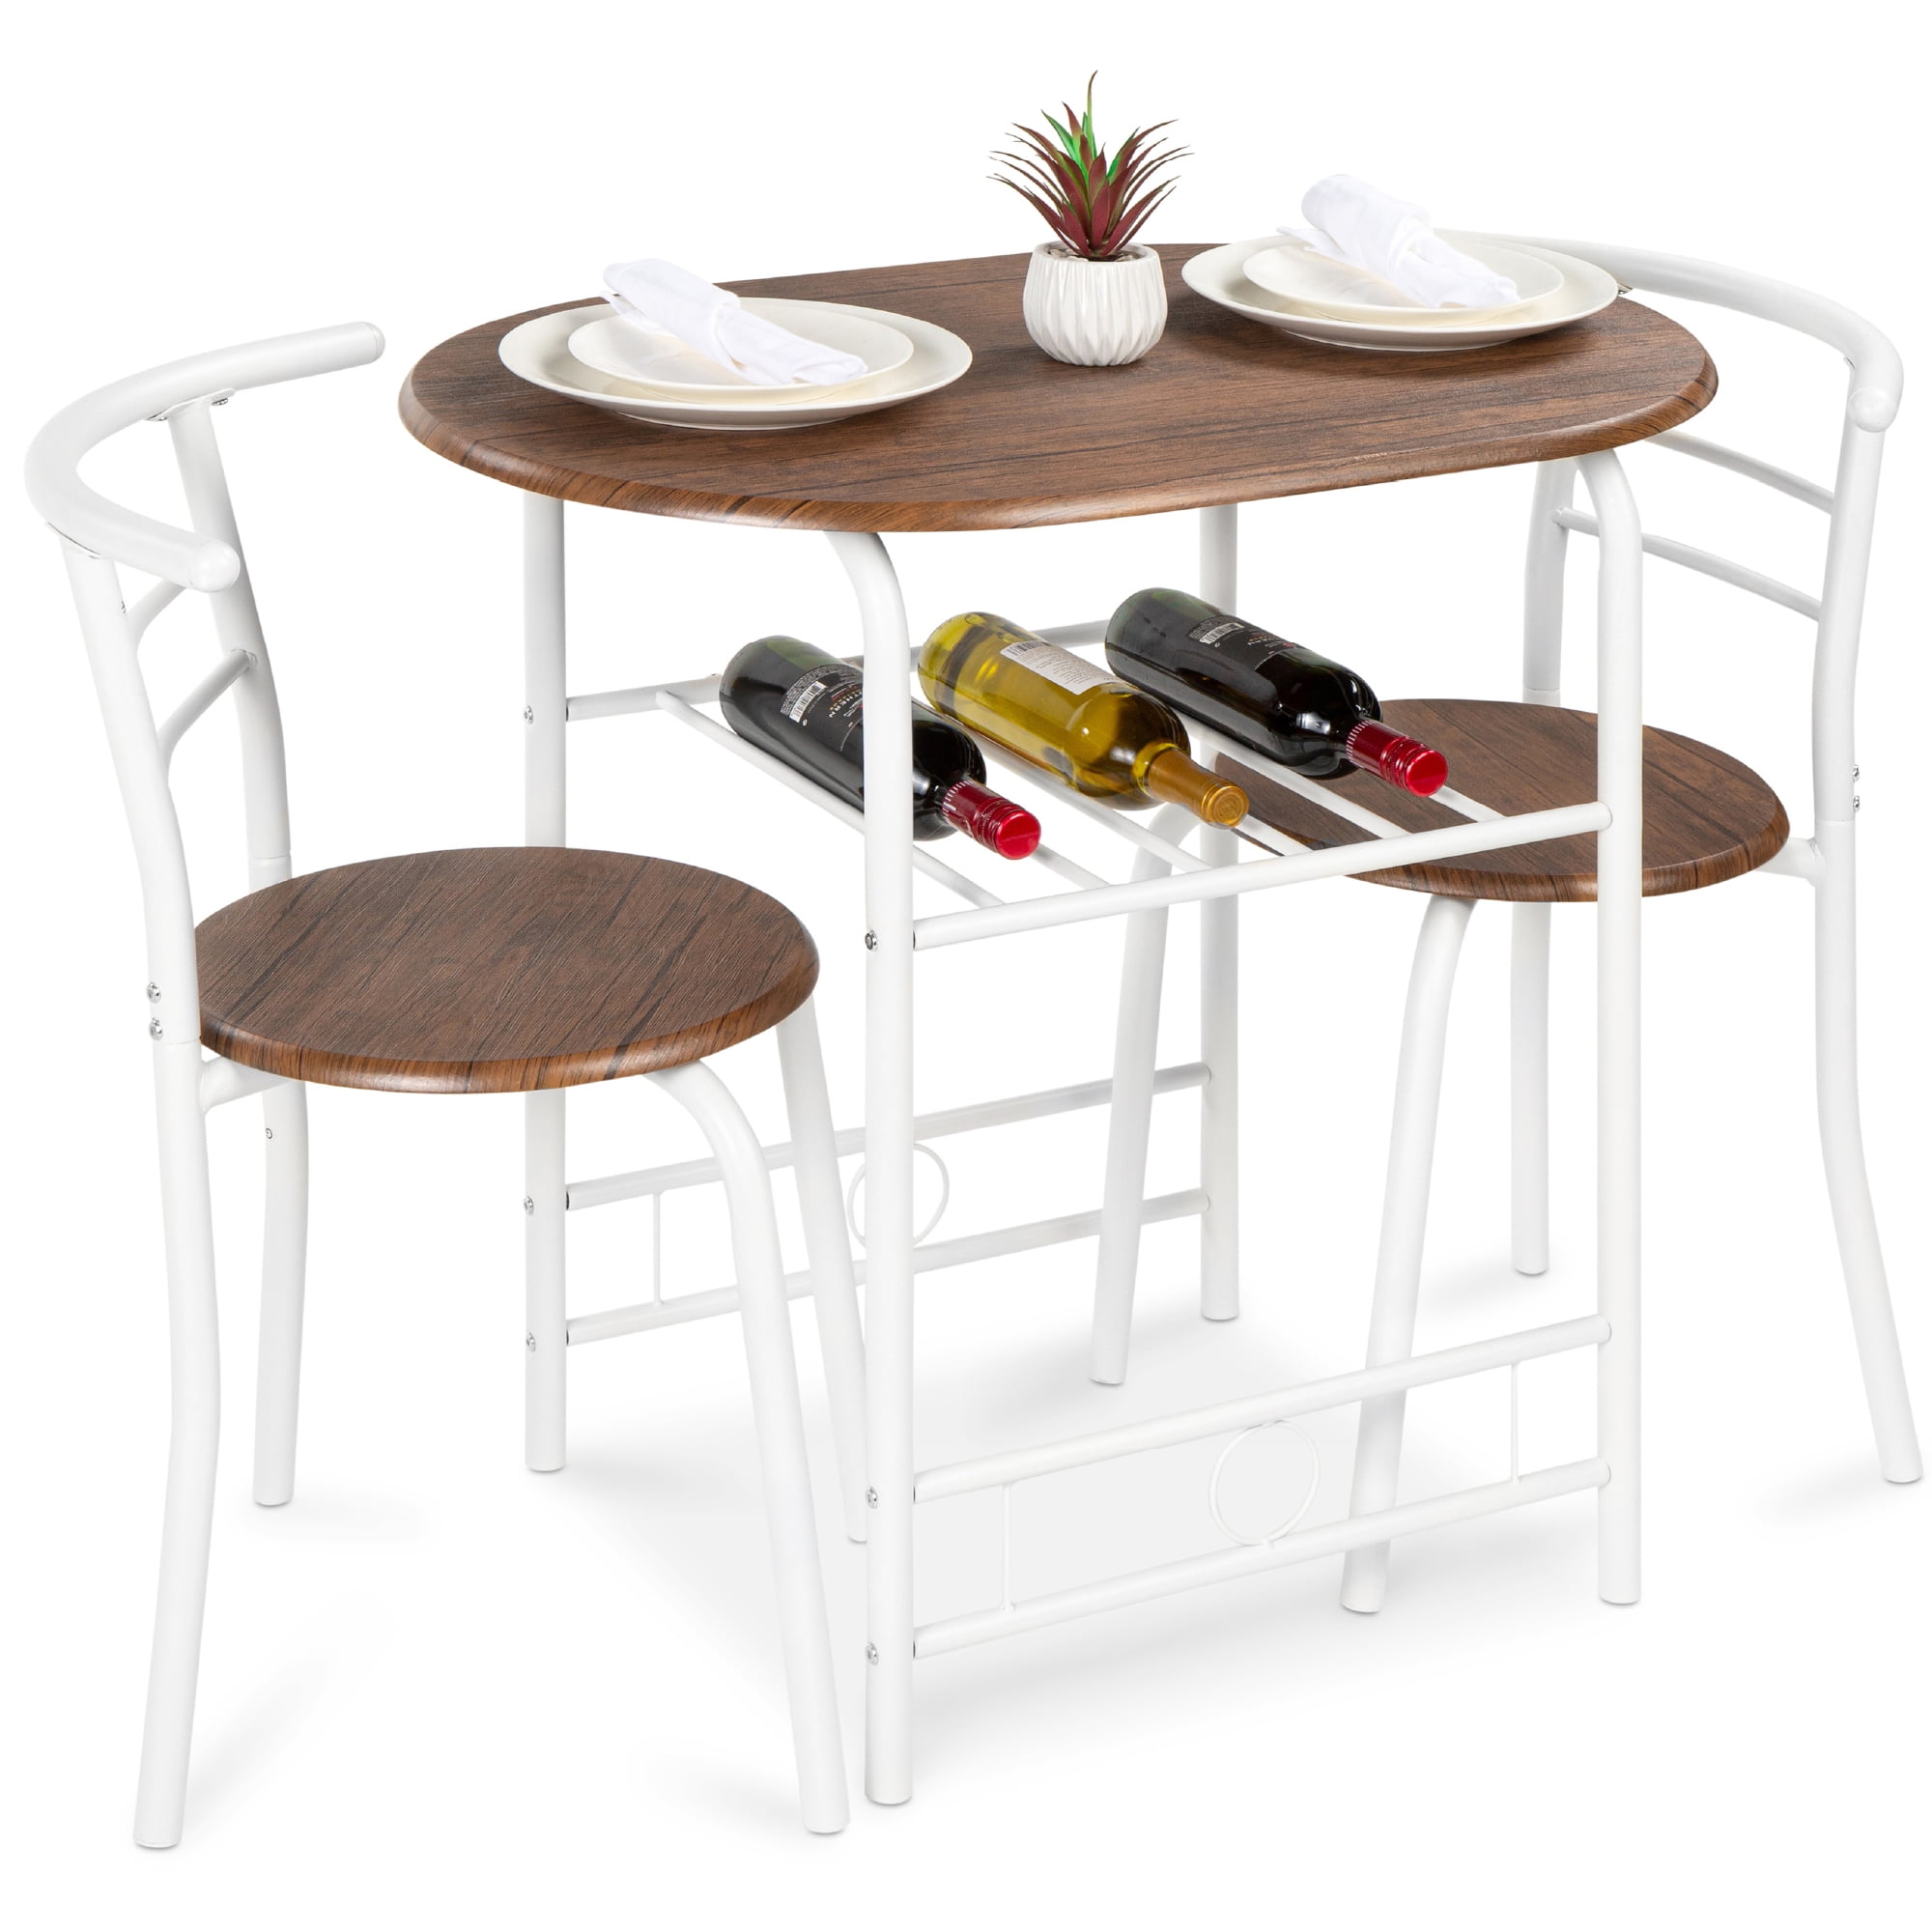 Best Choice Products 3-Piece Wood Dining Room Round Table & Chairs Set w/ Steel Frame, Built-In Wine Rack - White/Brown